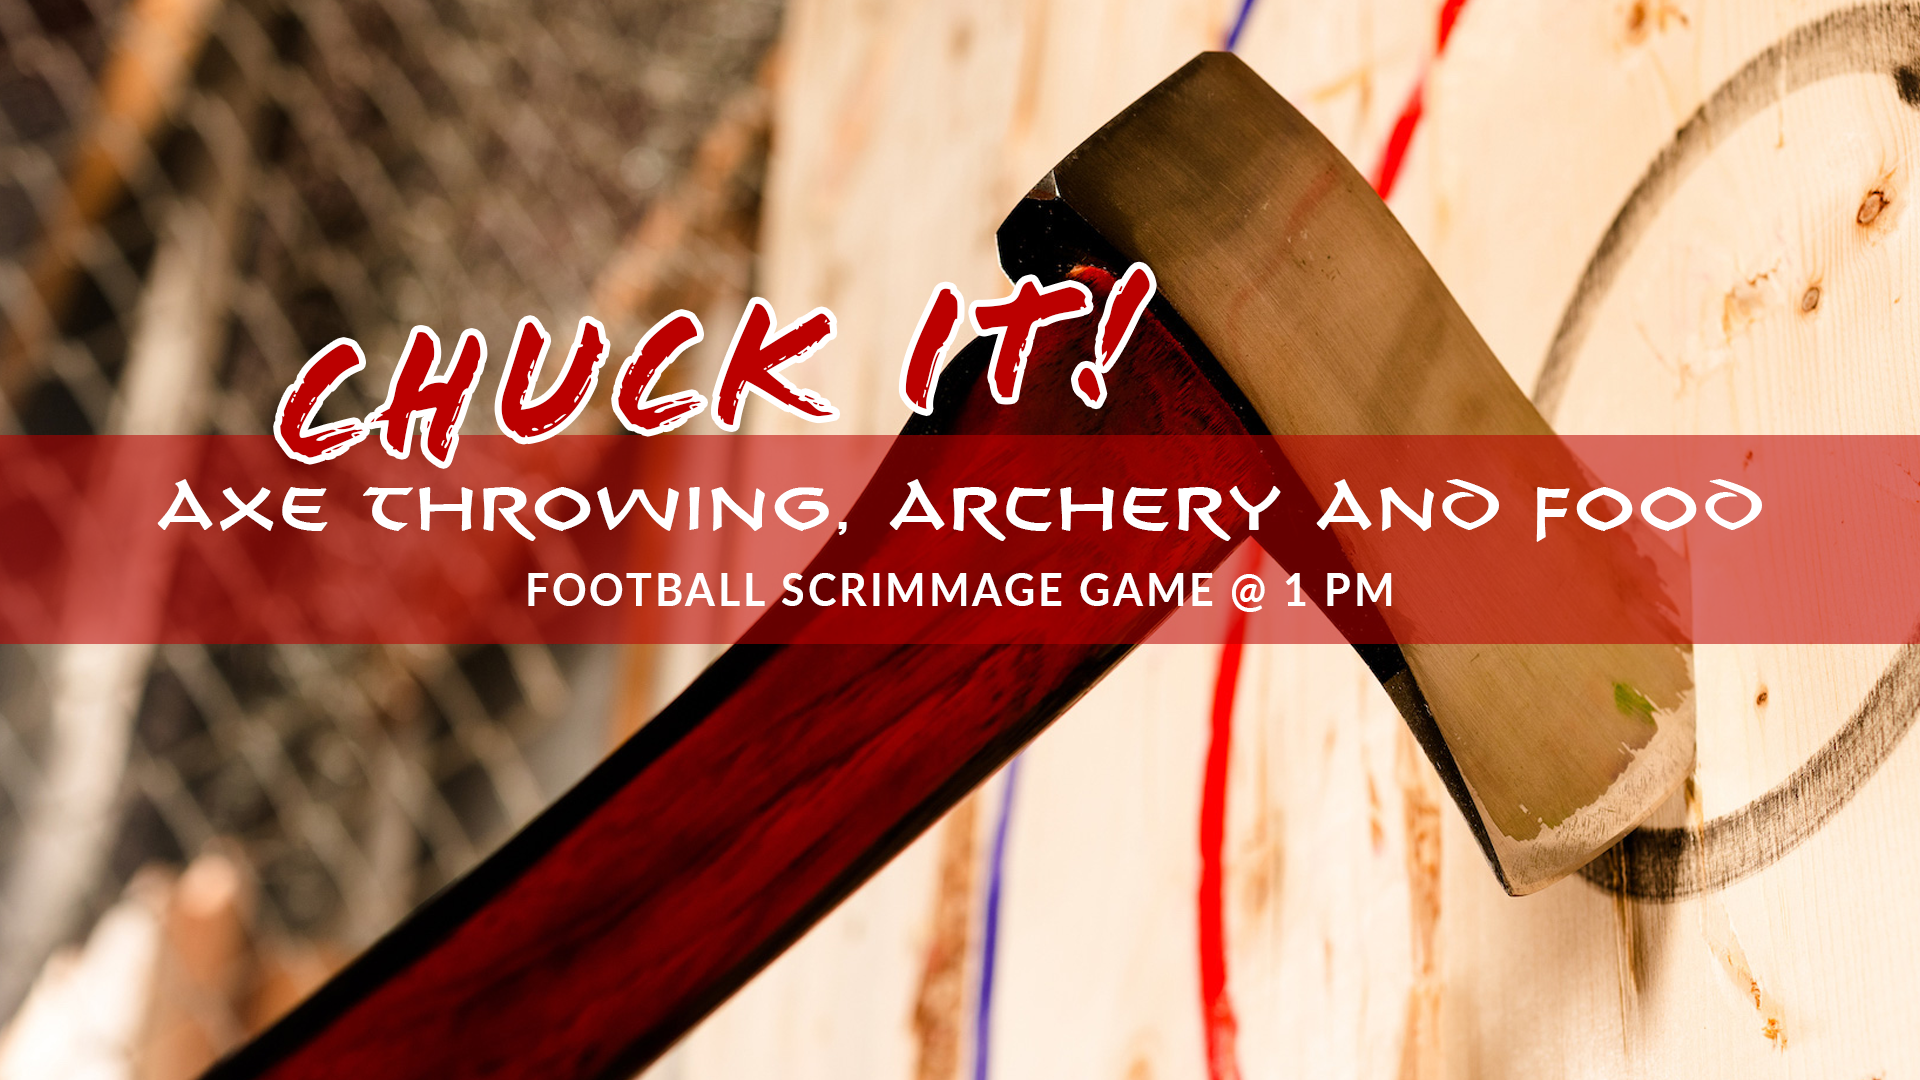 graphic for axe throwing event